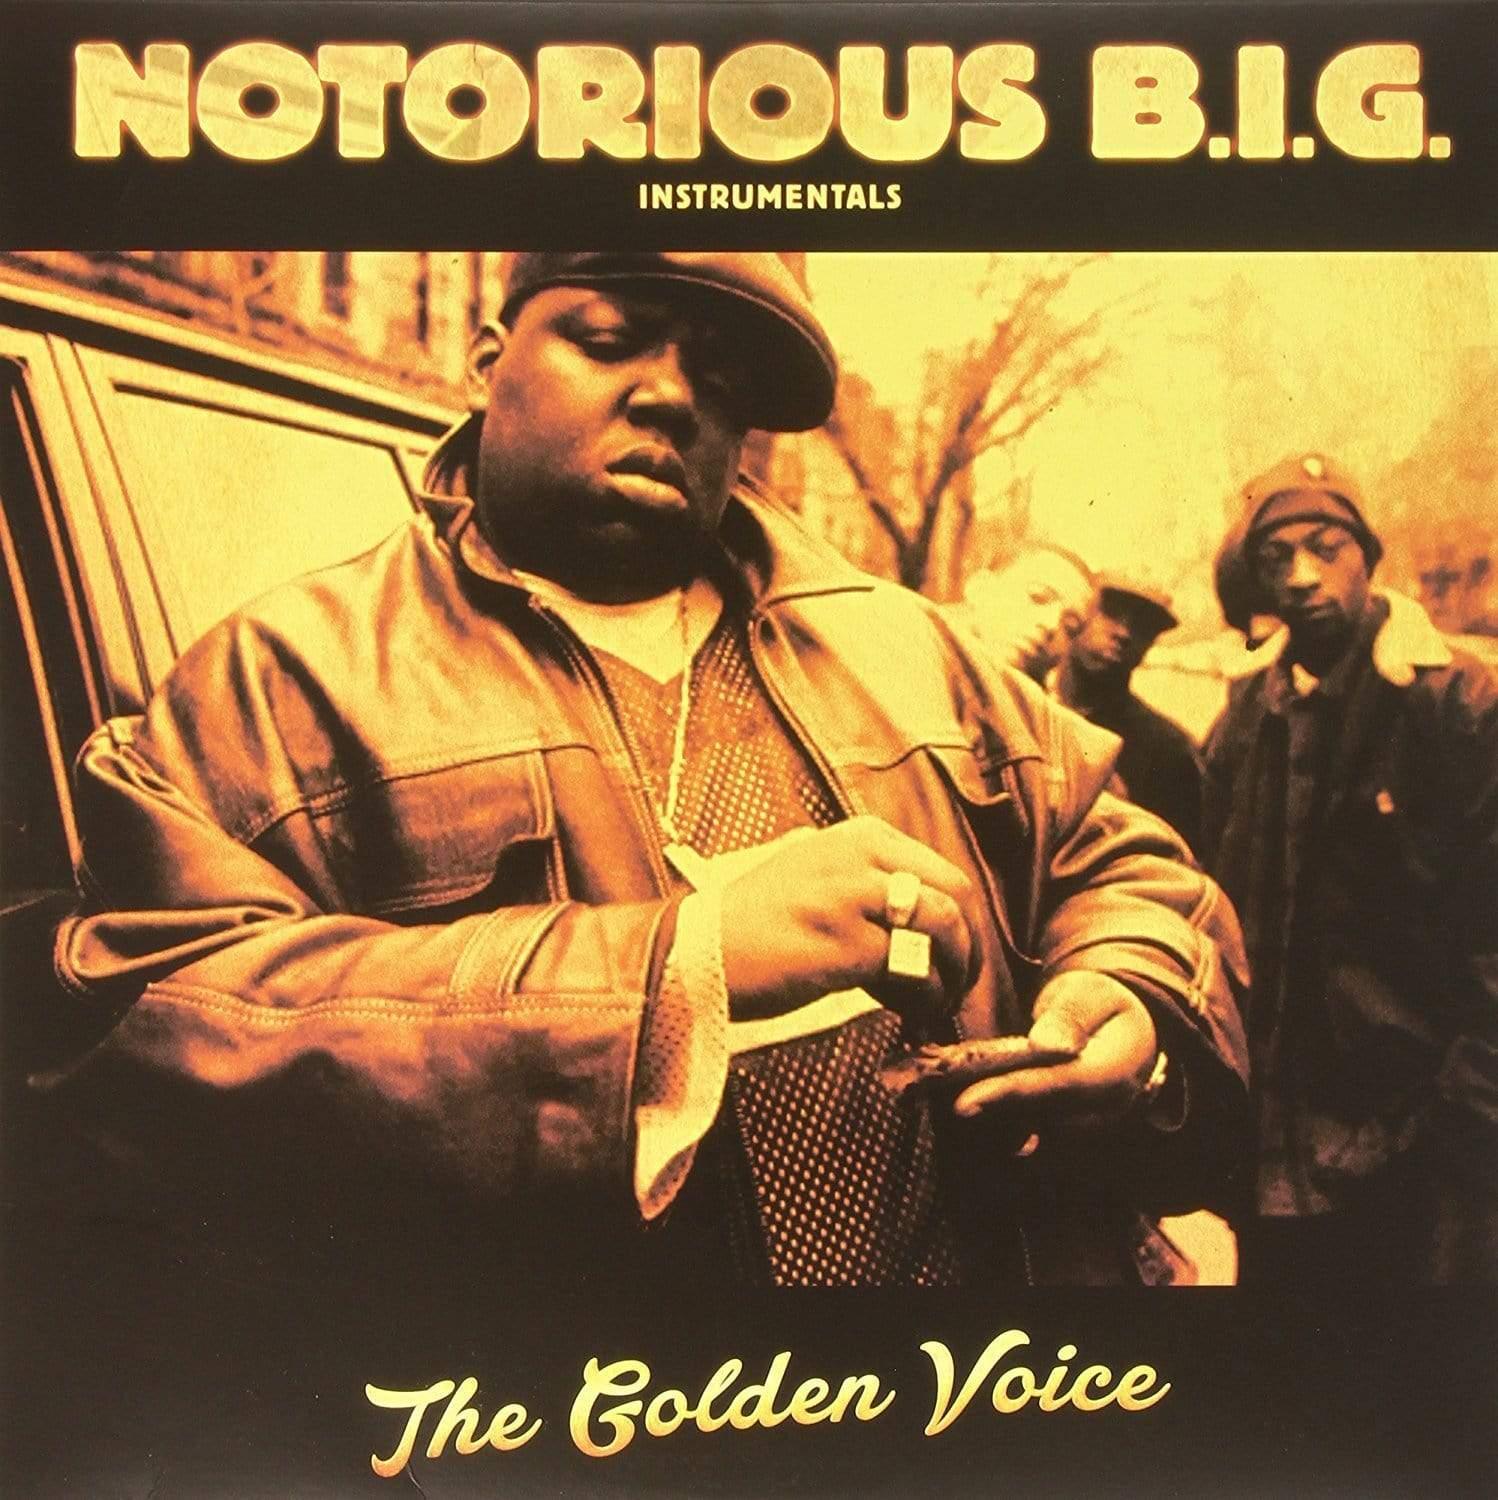 The Notorious B.I.G. - Instrumentals The Golden Voice - Joco Records